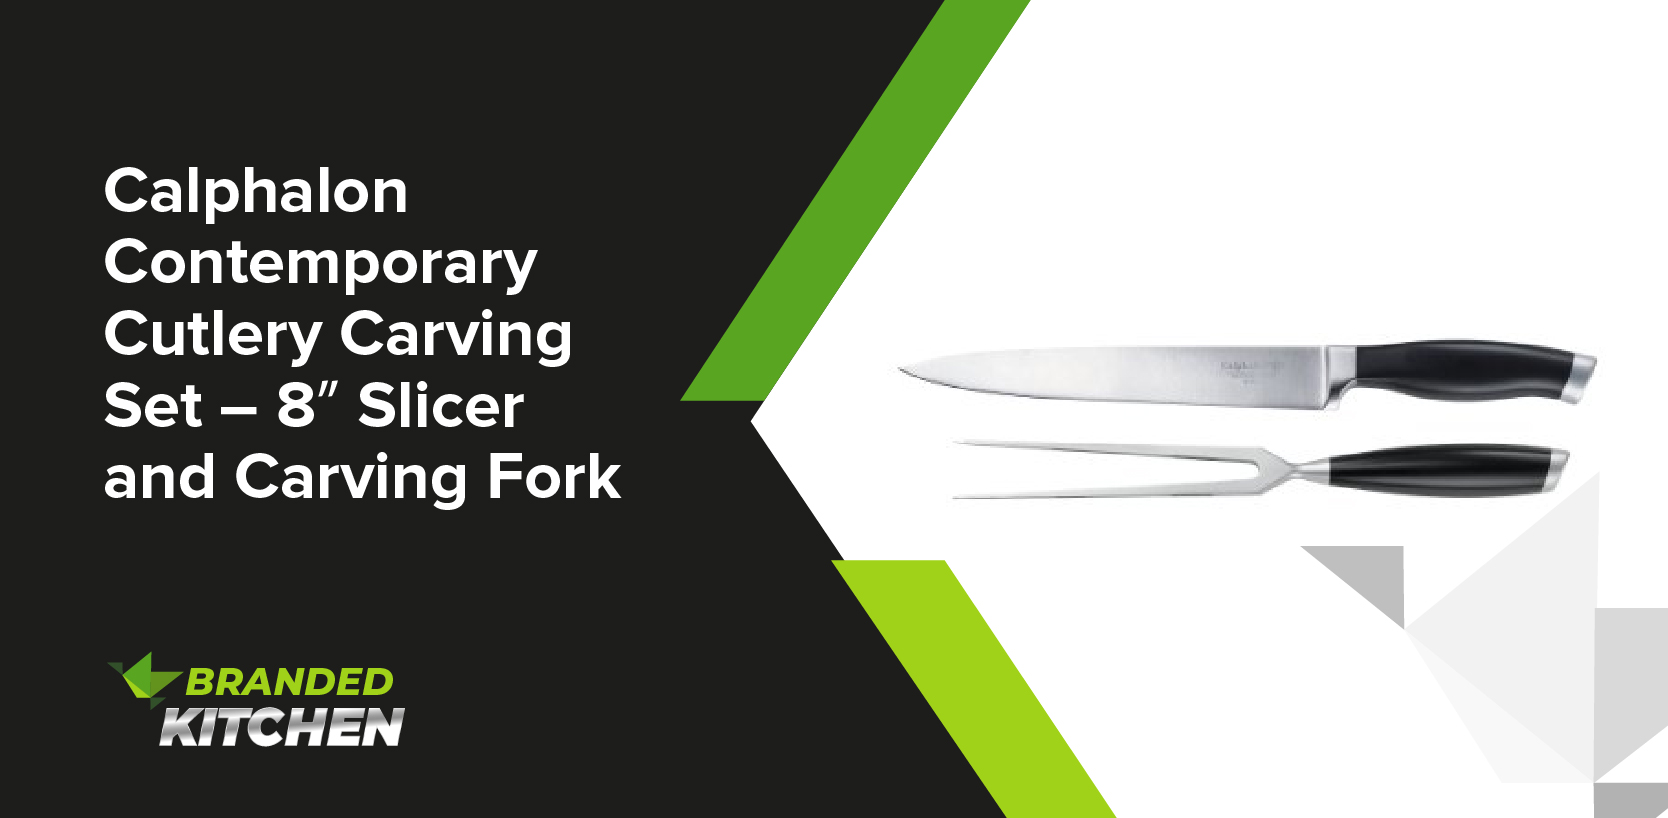 Calphalon Contemporary Cutlery Carving Set – 8″ Slicer and Carving Fork